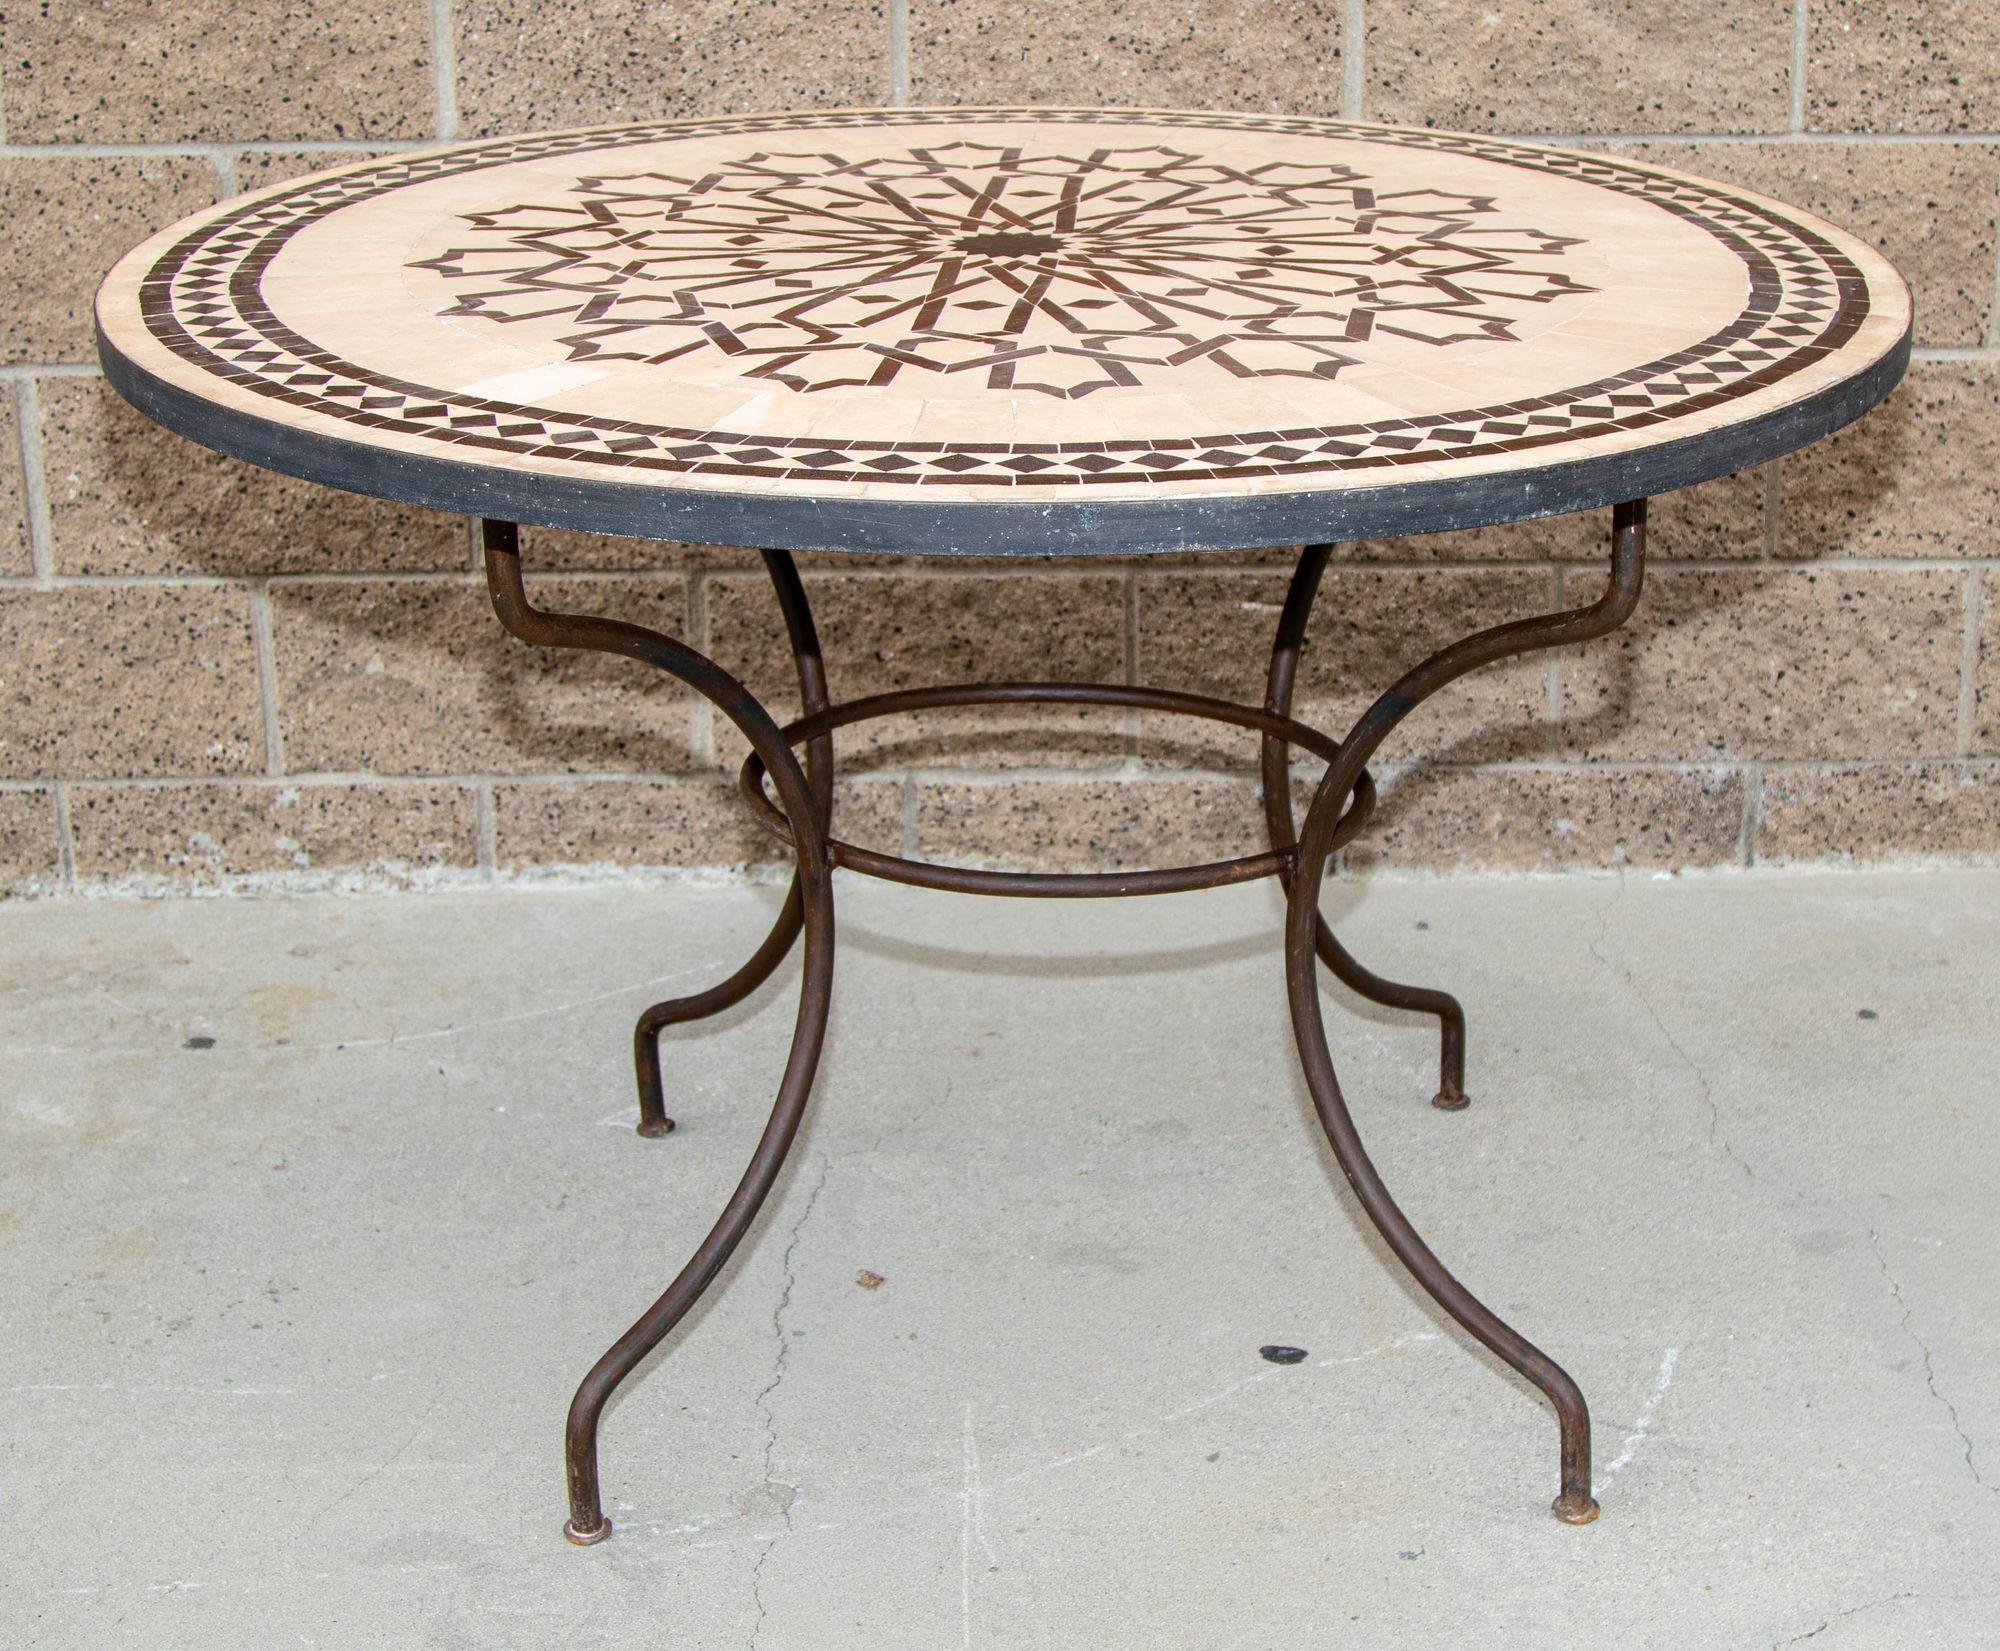 Handcrafted round Moroccan outdoor mosaic tile table 47in diameter on iron base.
Classic and elegant Moroccan outdoor mosaic tile table sit on a wrought iron base.
Handmade in Morocco, the artisans from Fez used the classic chiseled design in red